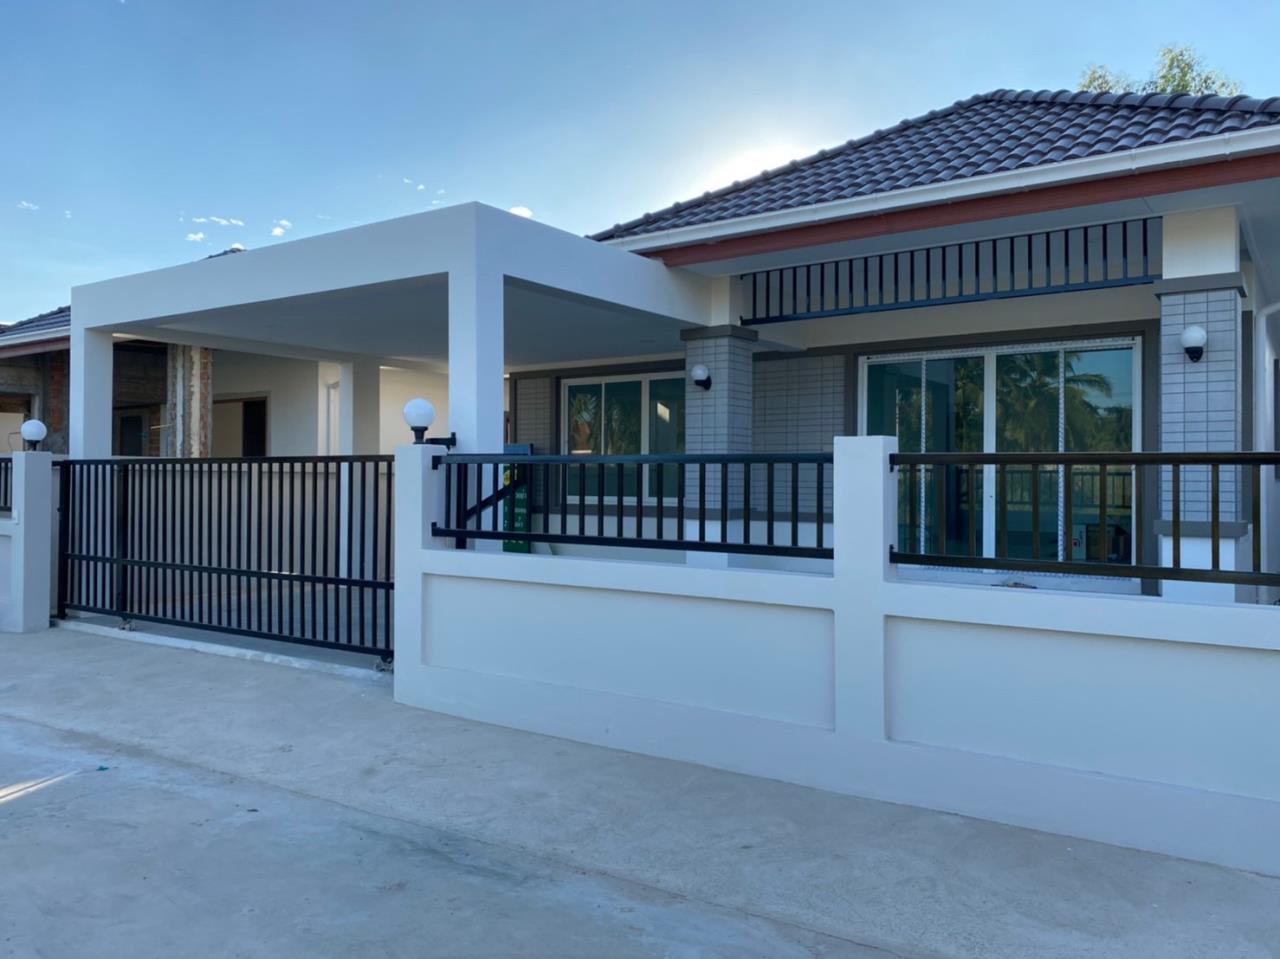 Thaiproperty1 Agency's New Single Storey House Project With Affordable Price - Hua Hin 1